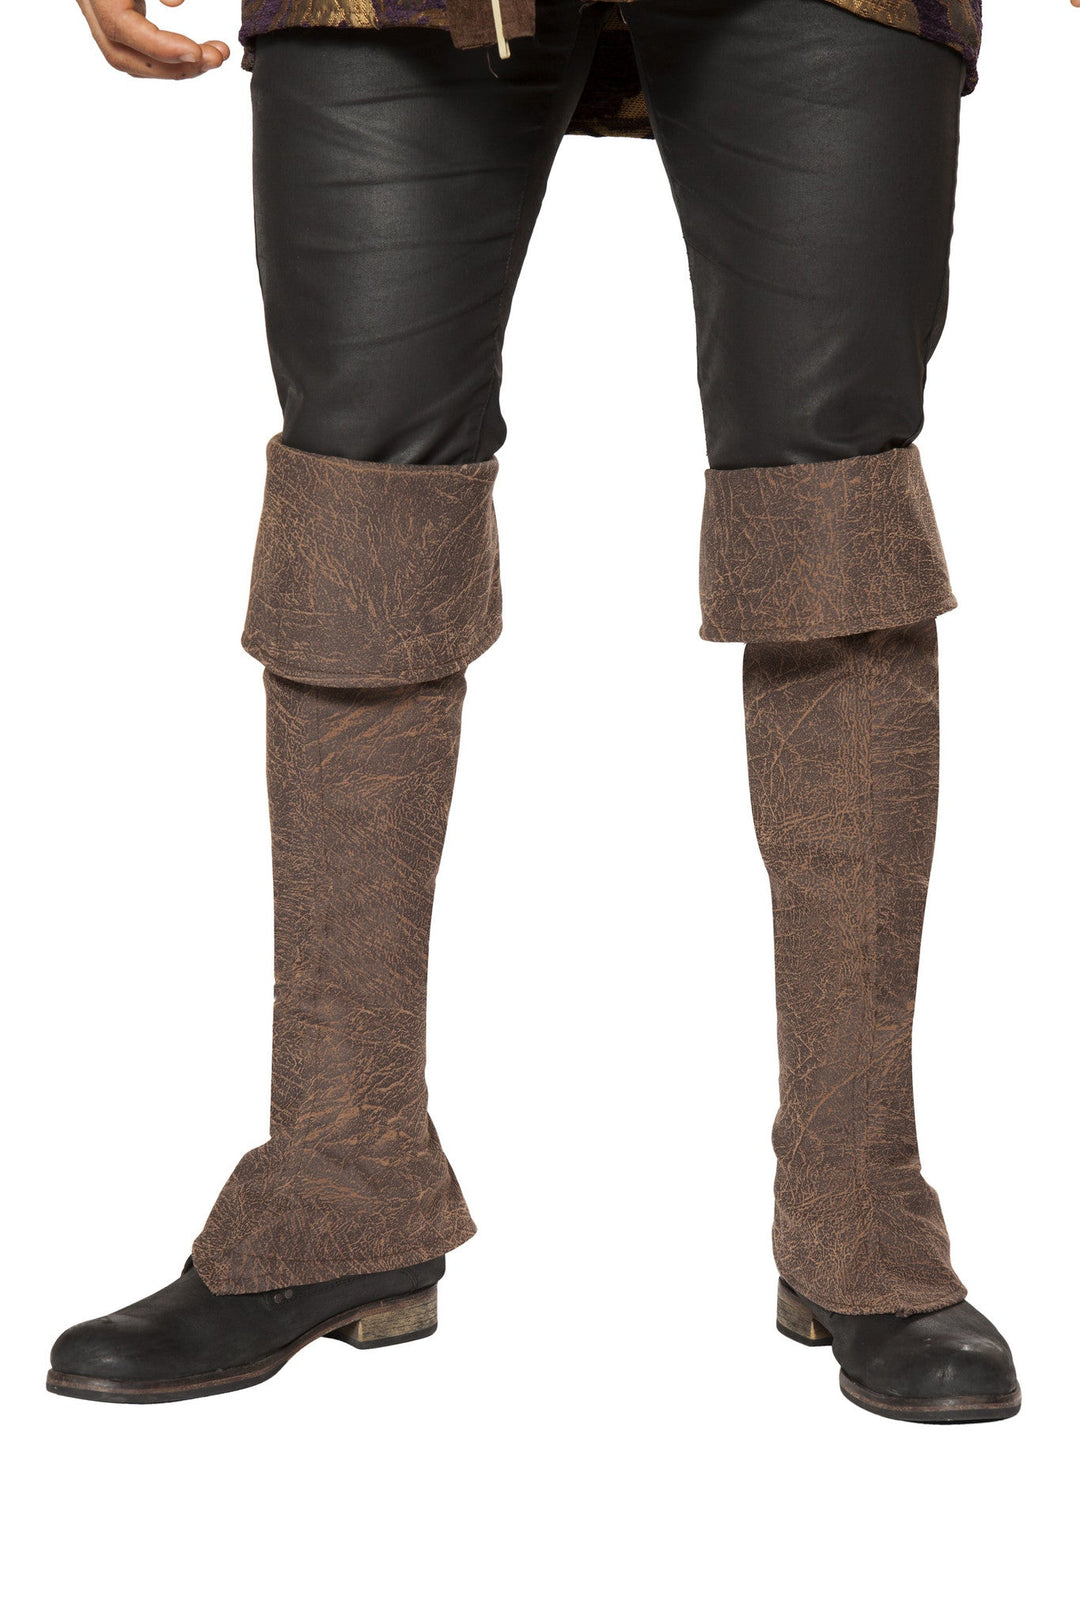 Brown Pirate Boot Covers with Zipper Detail